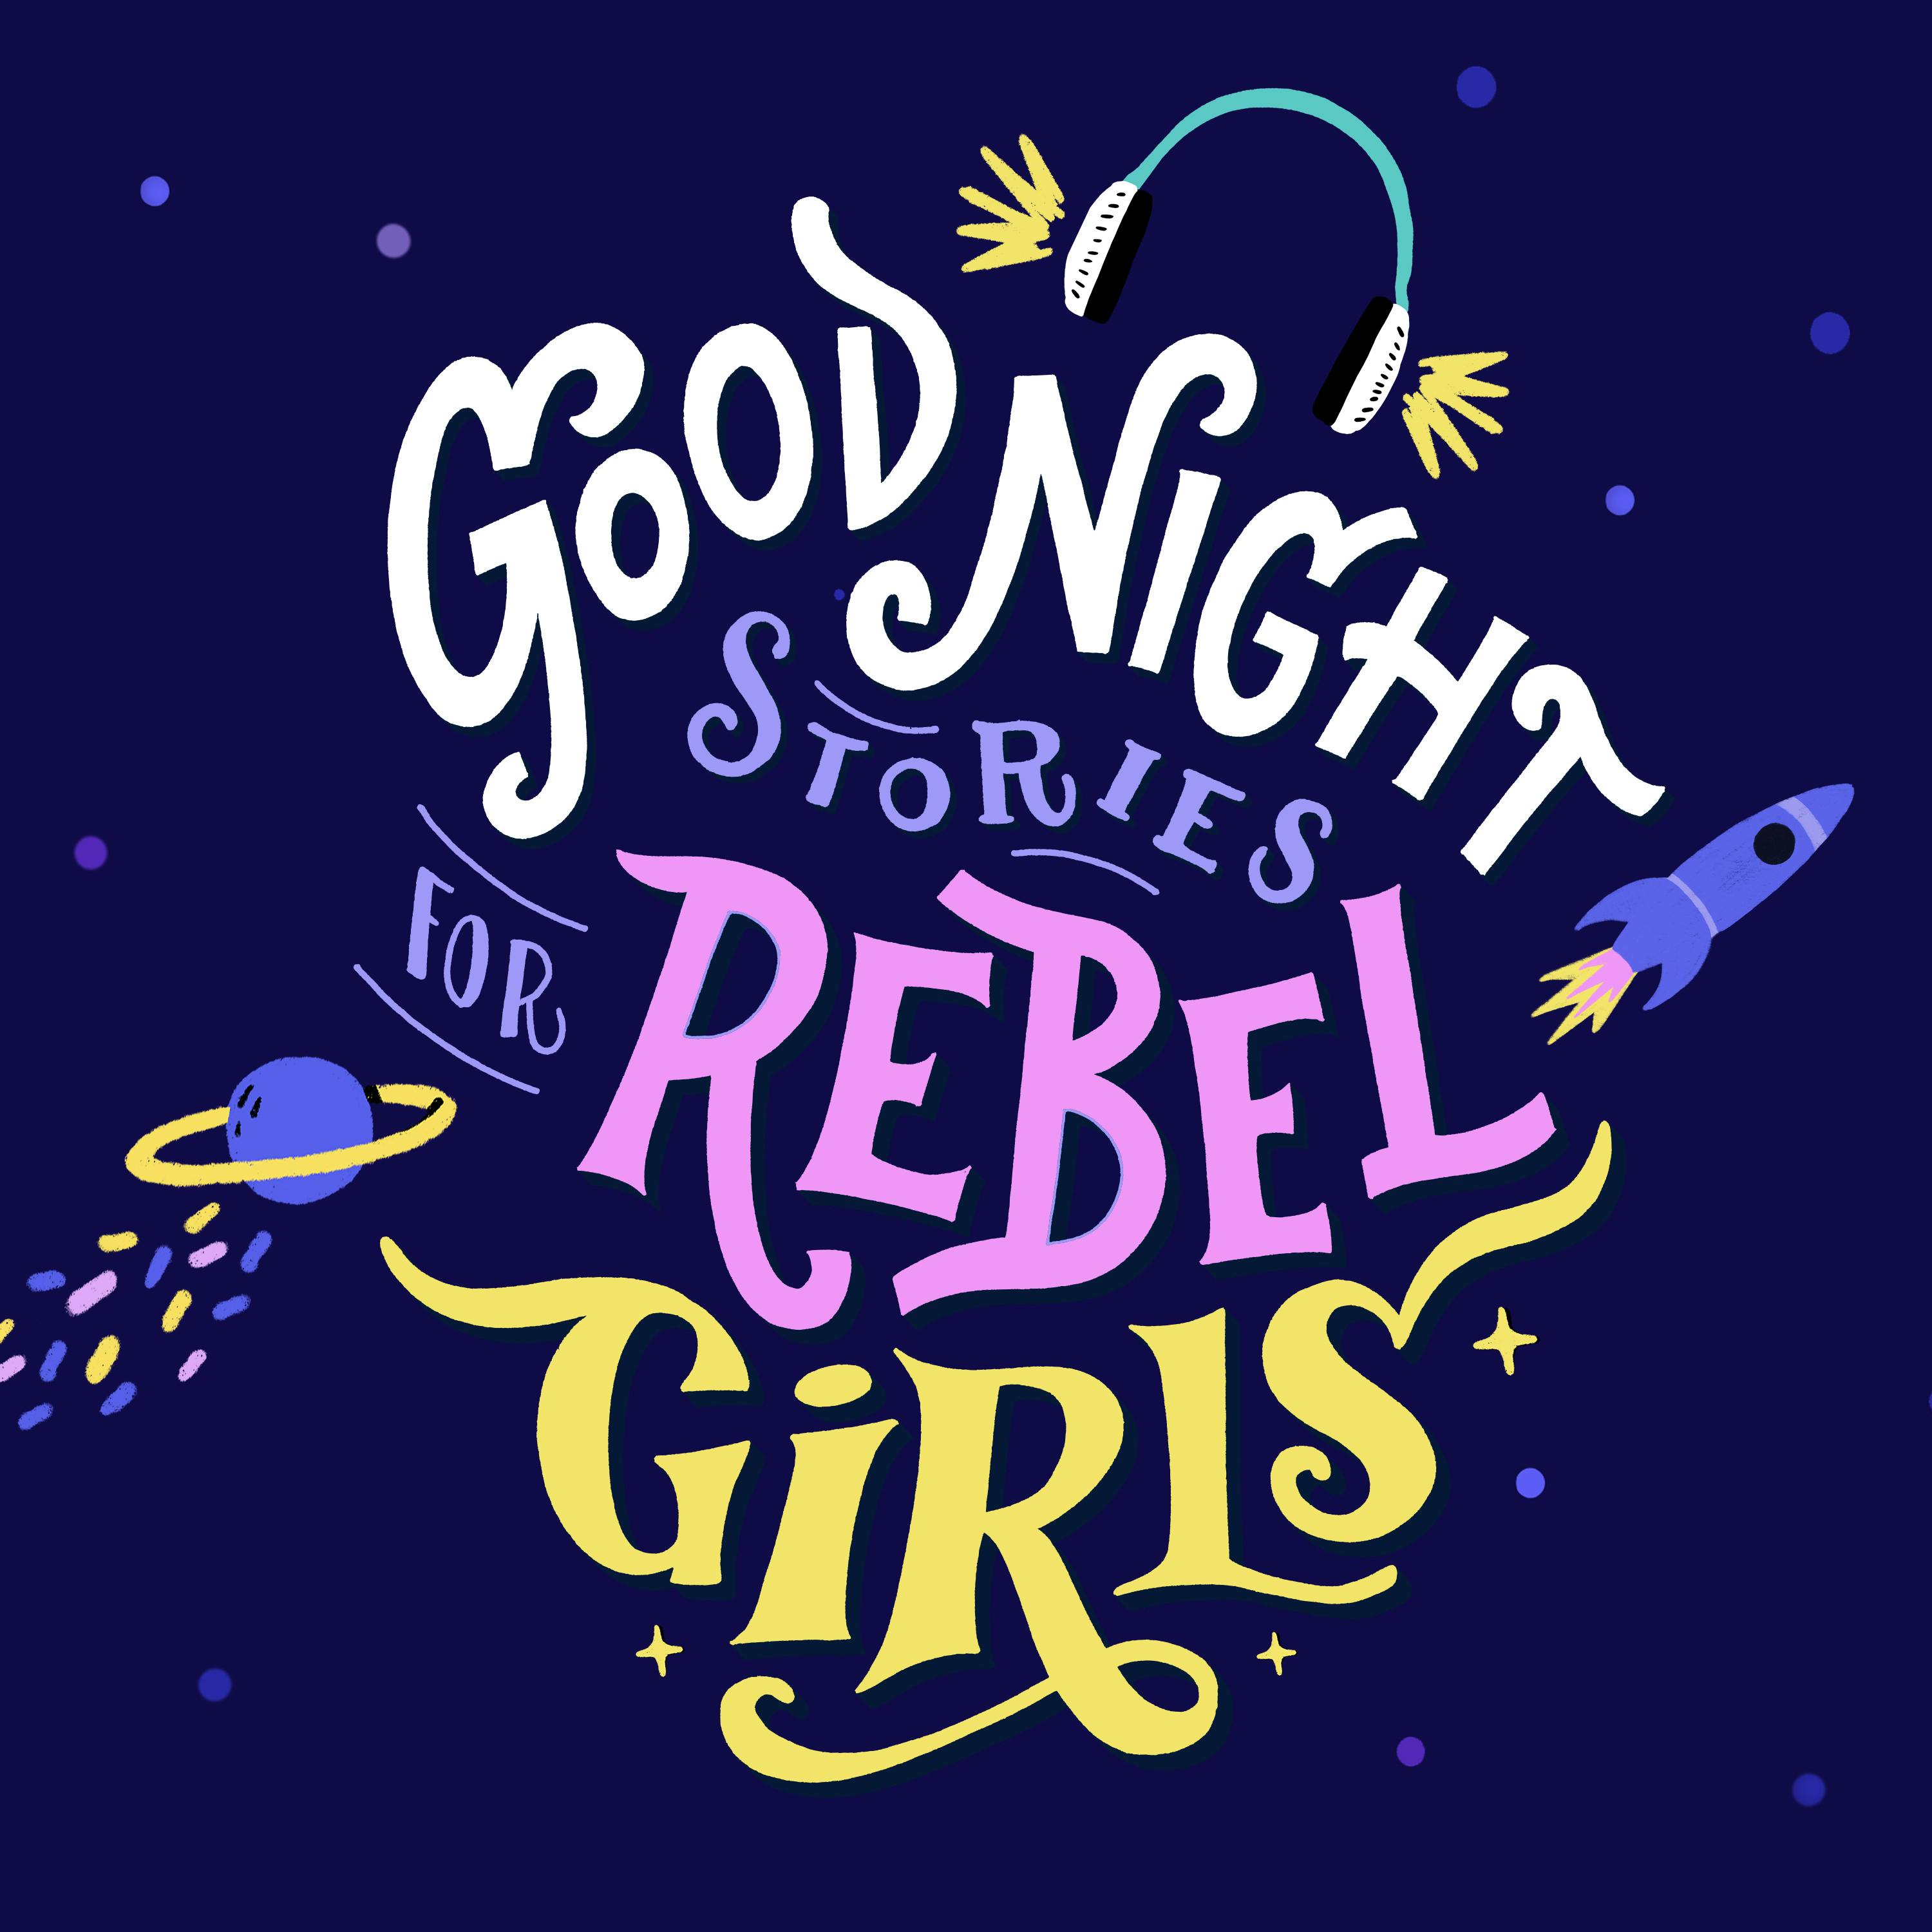 Good Night Stories for Rebel Girls podcast show image